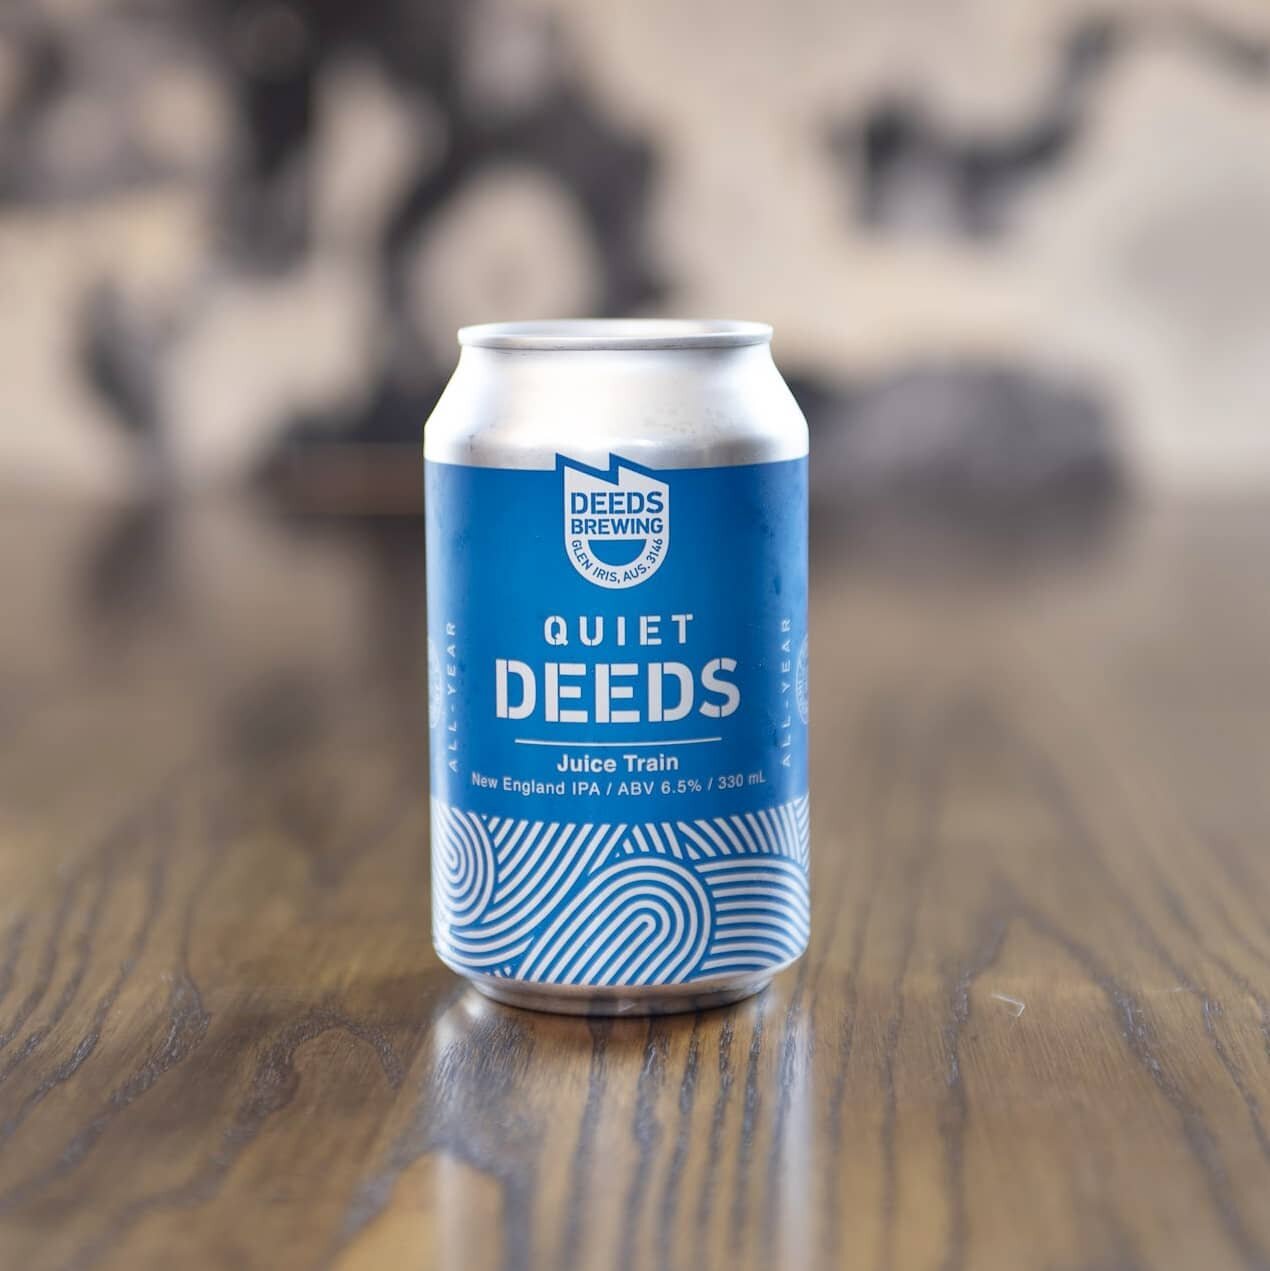 Another Good drop from @deedsbrewing
📸Bolt Photography